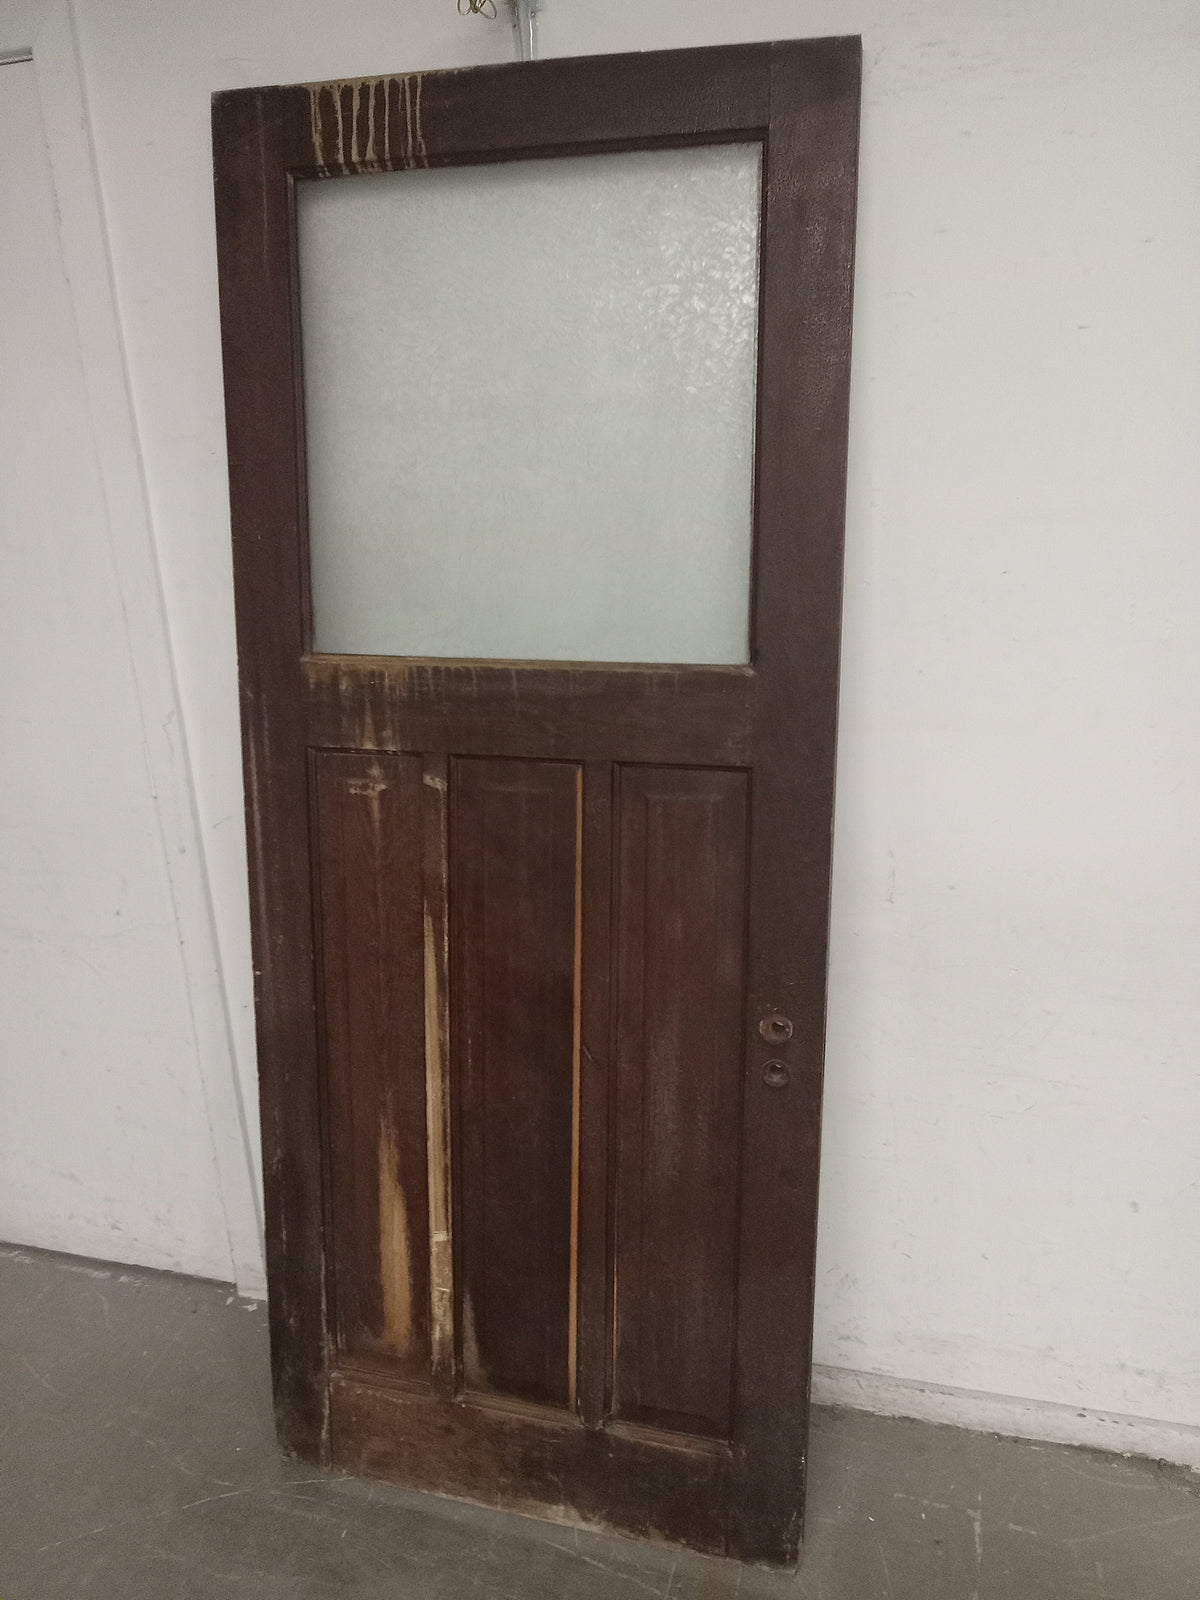 34" x 82" Wooden Door with Frosted Glass Panel